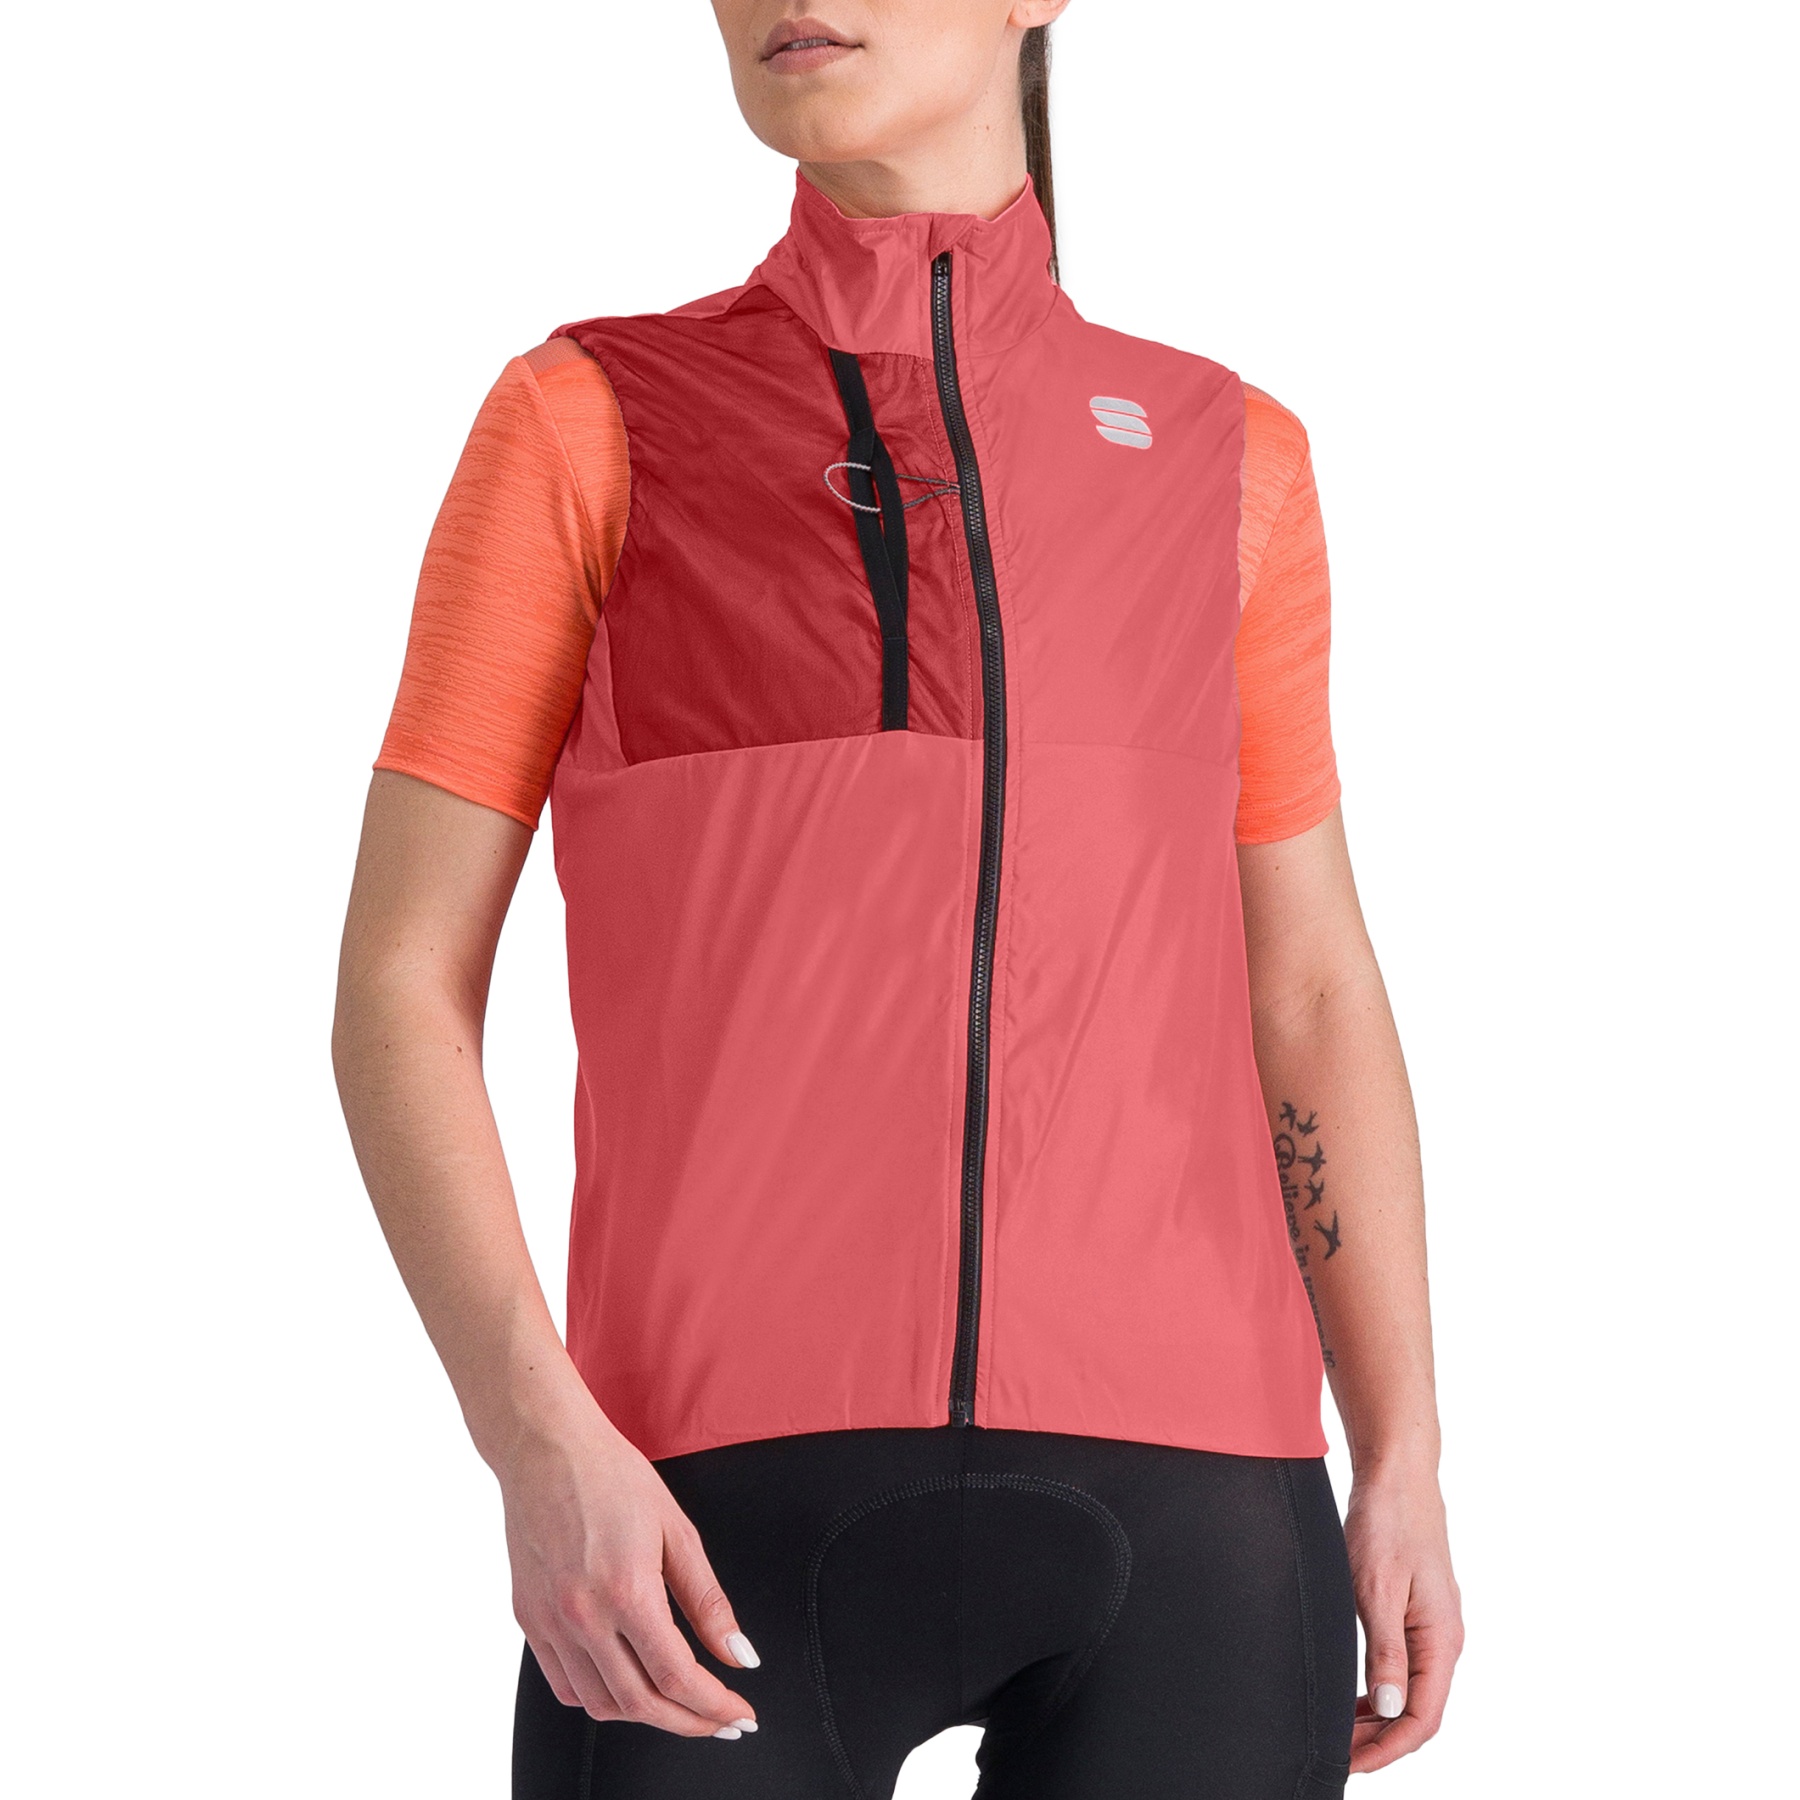 Picture of Sportful Supergiara Layer Vest Women - 675 Dusty Red